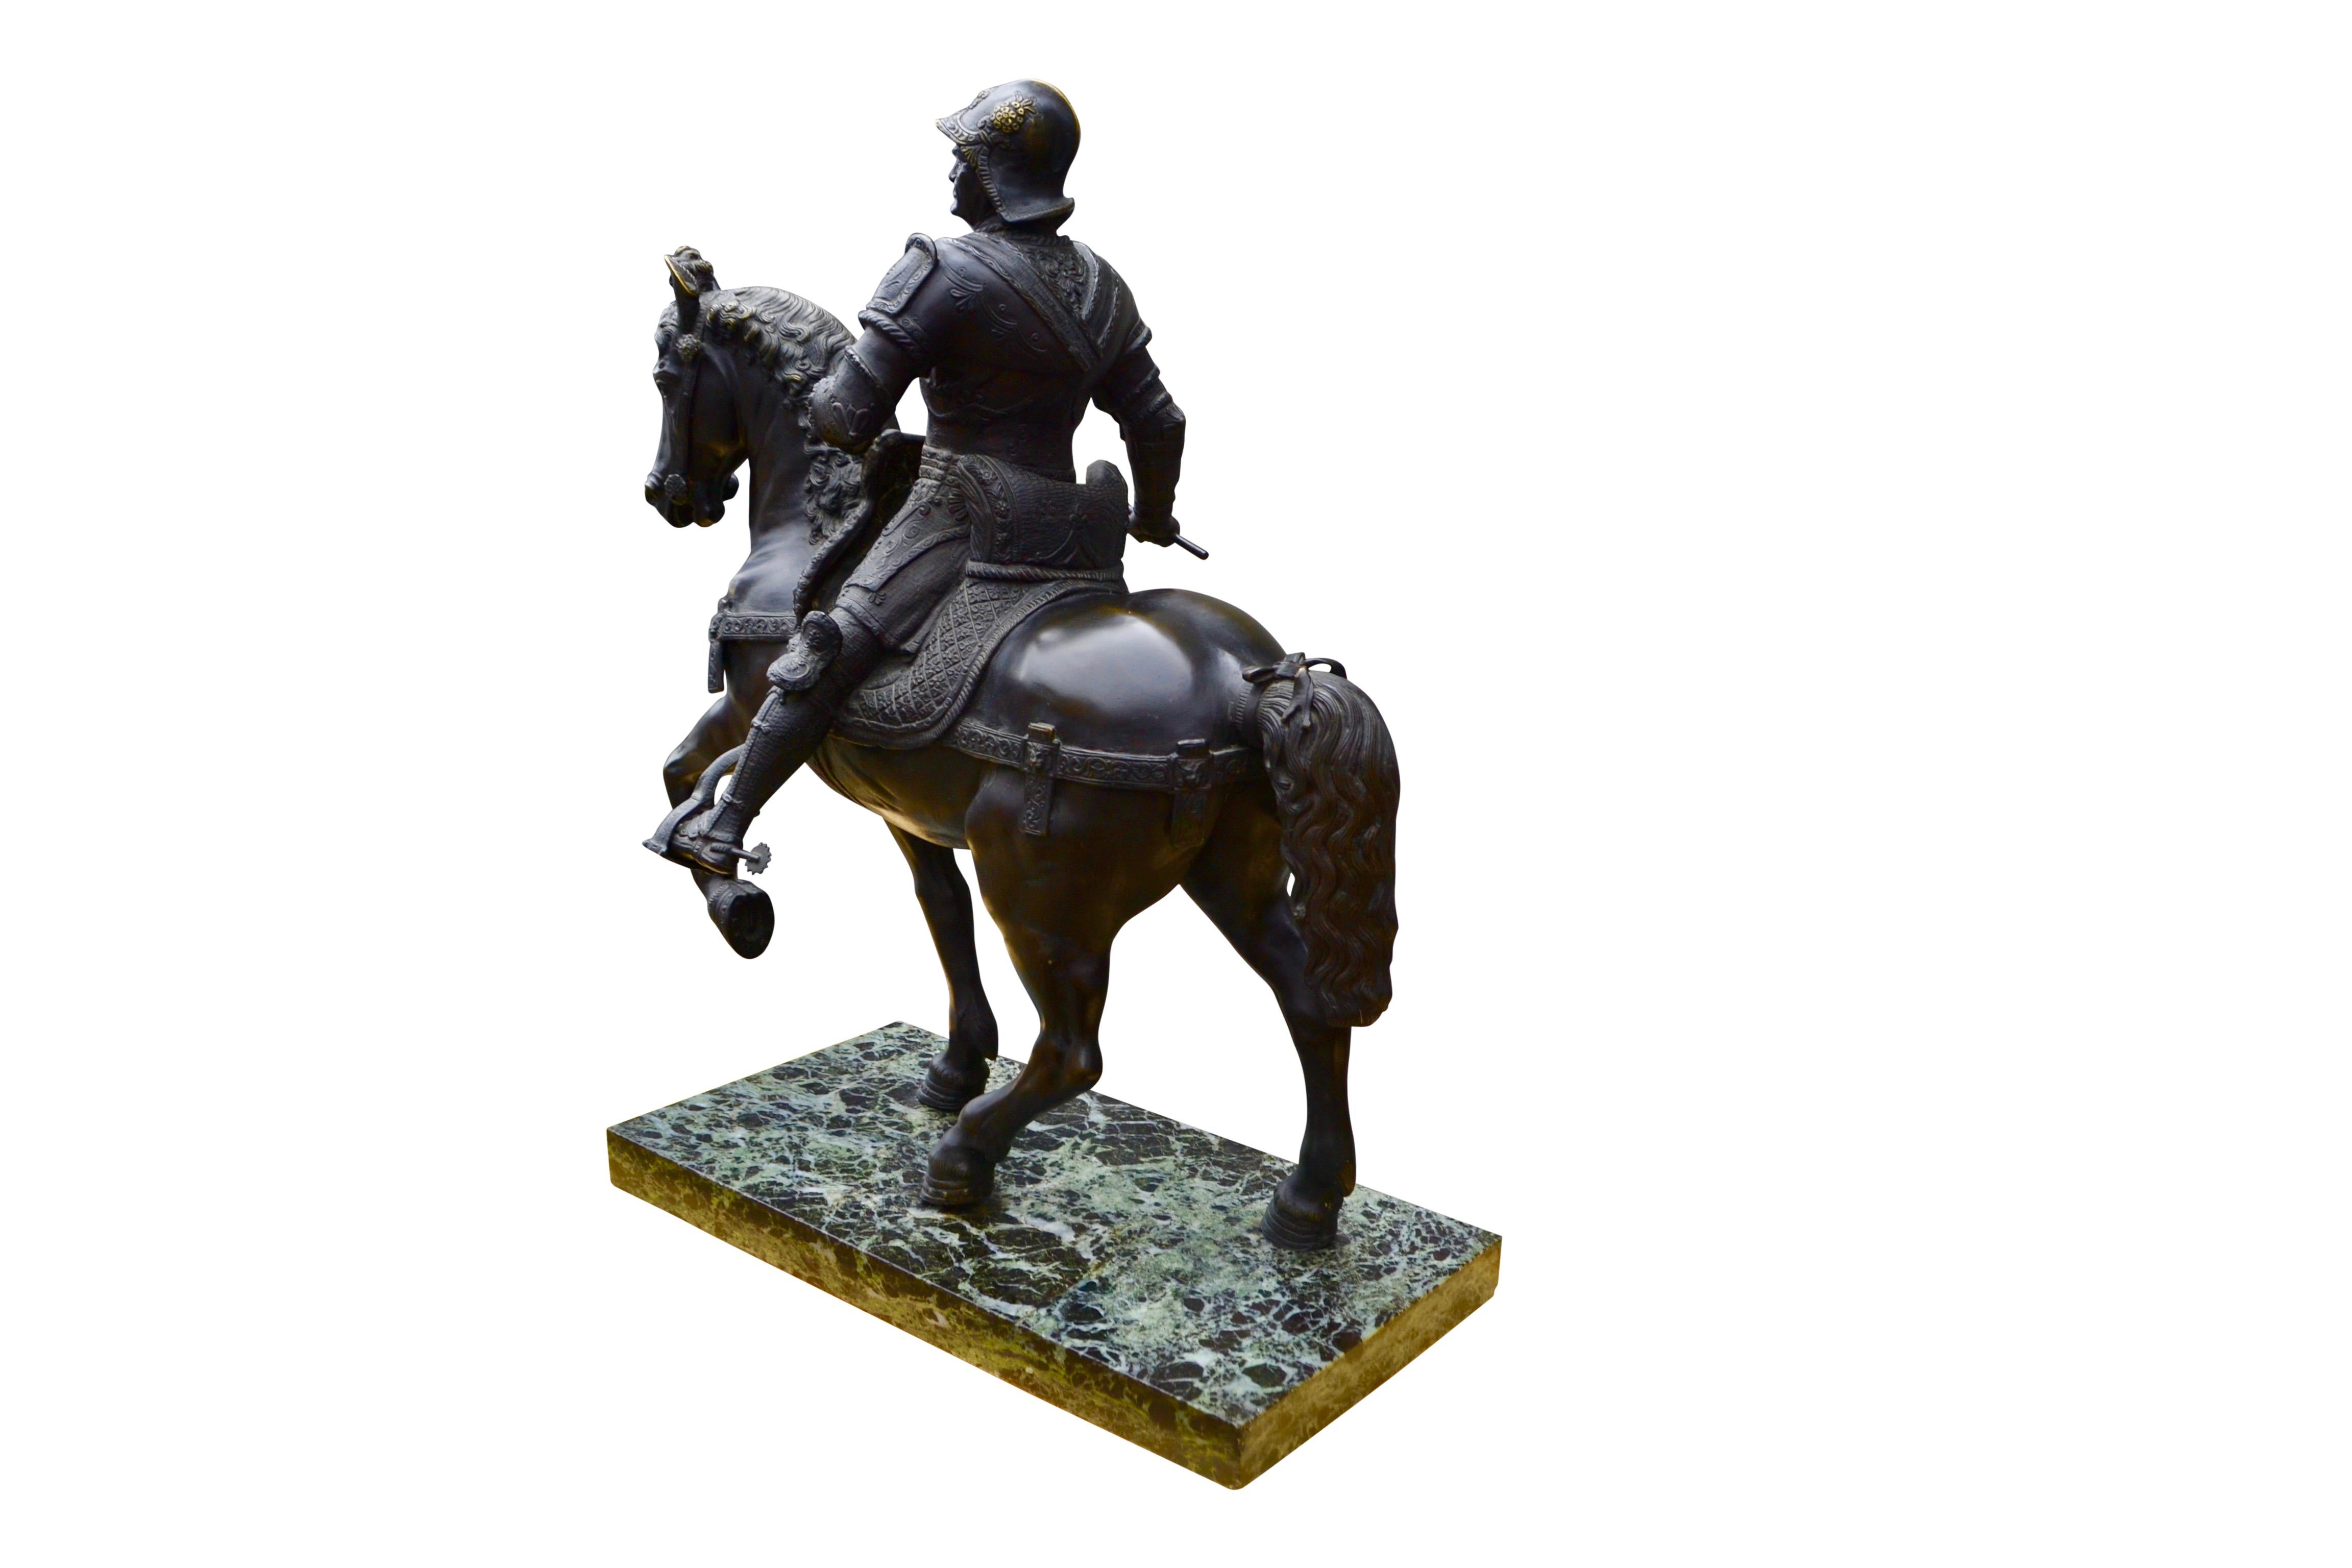 A very finely cast late 19 century Grand Tour bronze replica of the renowned statue of Bartolomeo Colleoni on horseback set on a verde antico marble base after the life sized bronze statue by the Renaissance sculptor Andrea Del Verrocchio that has